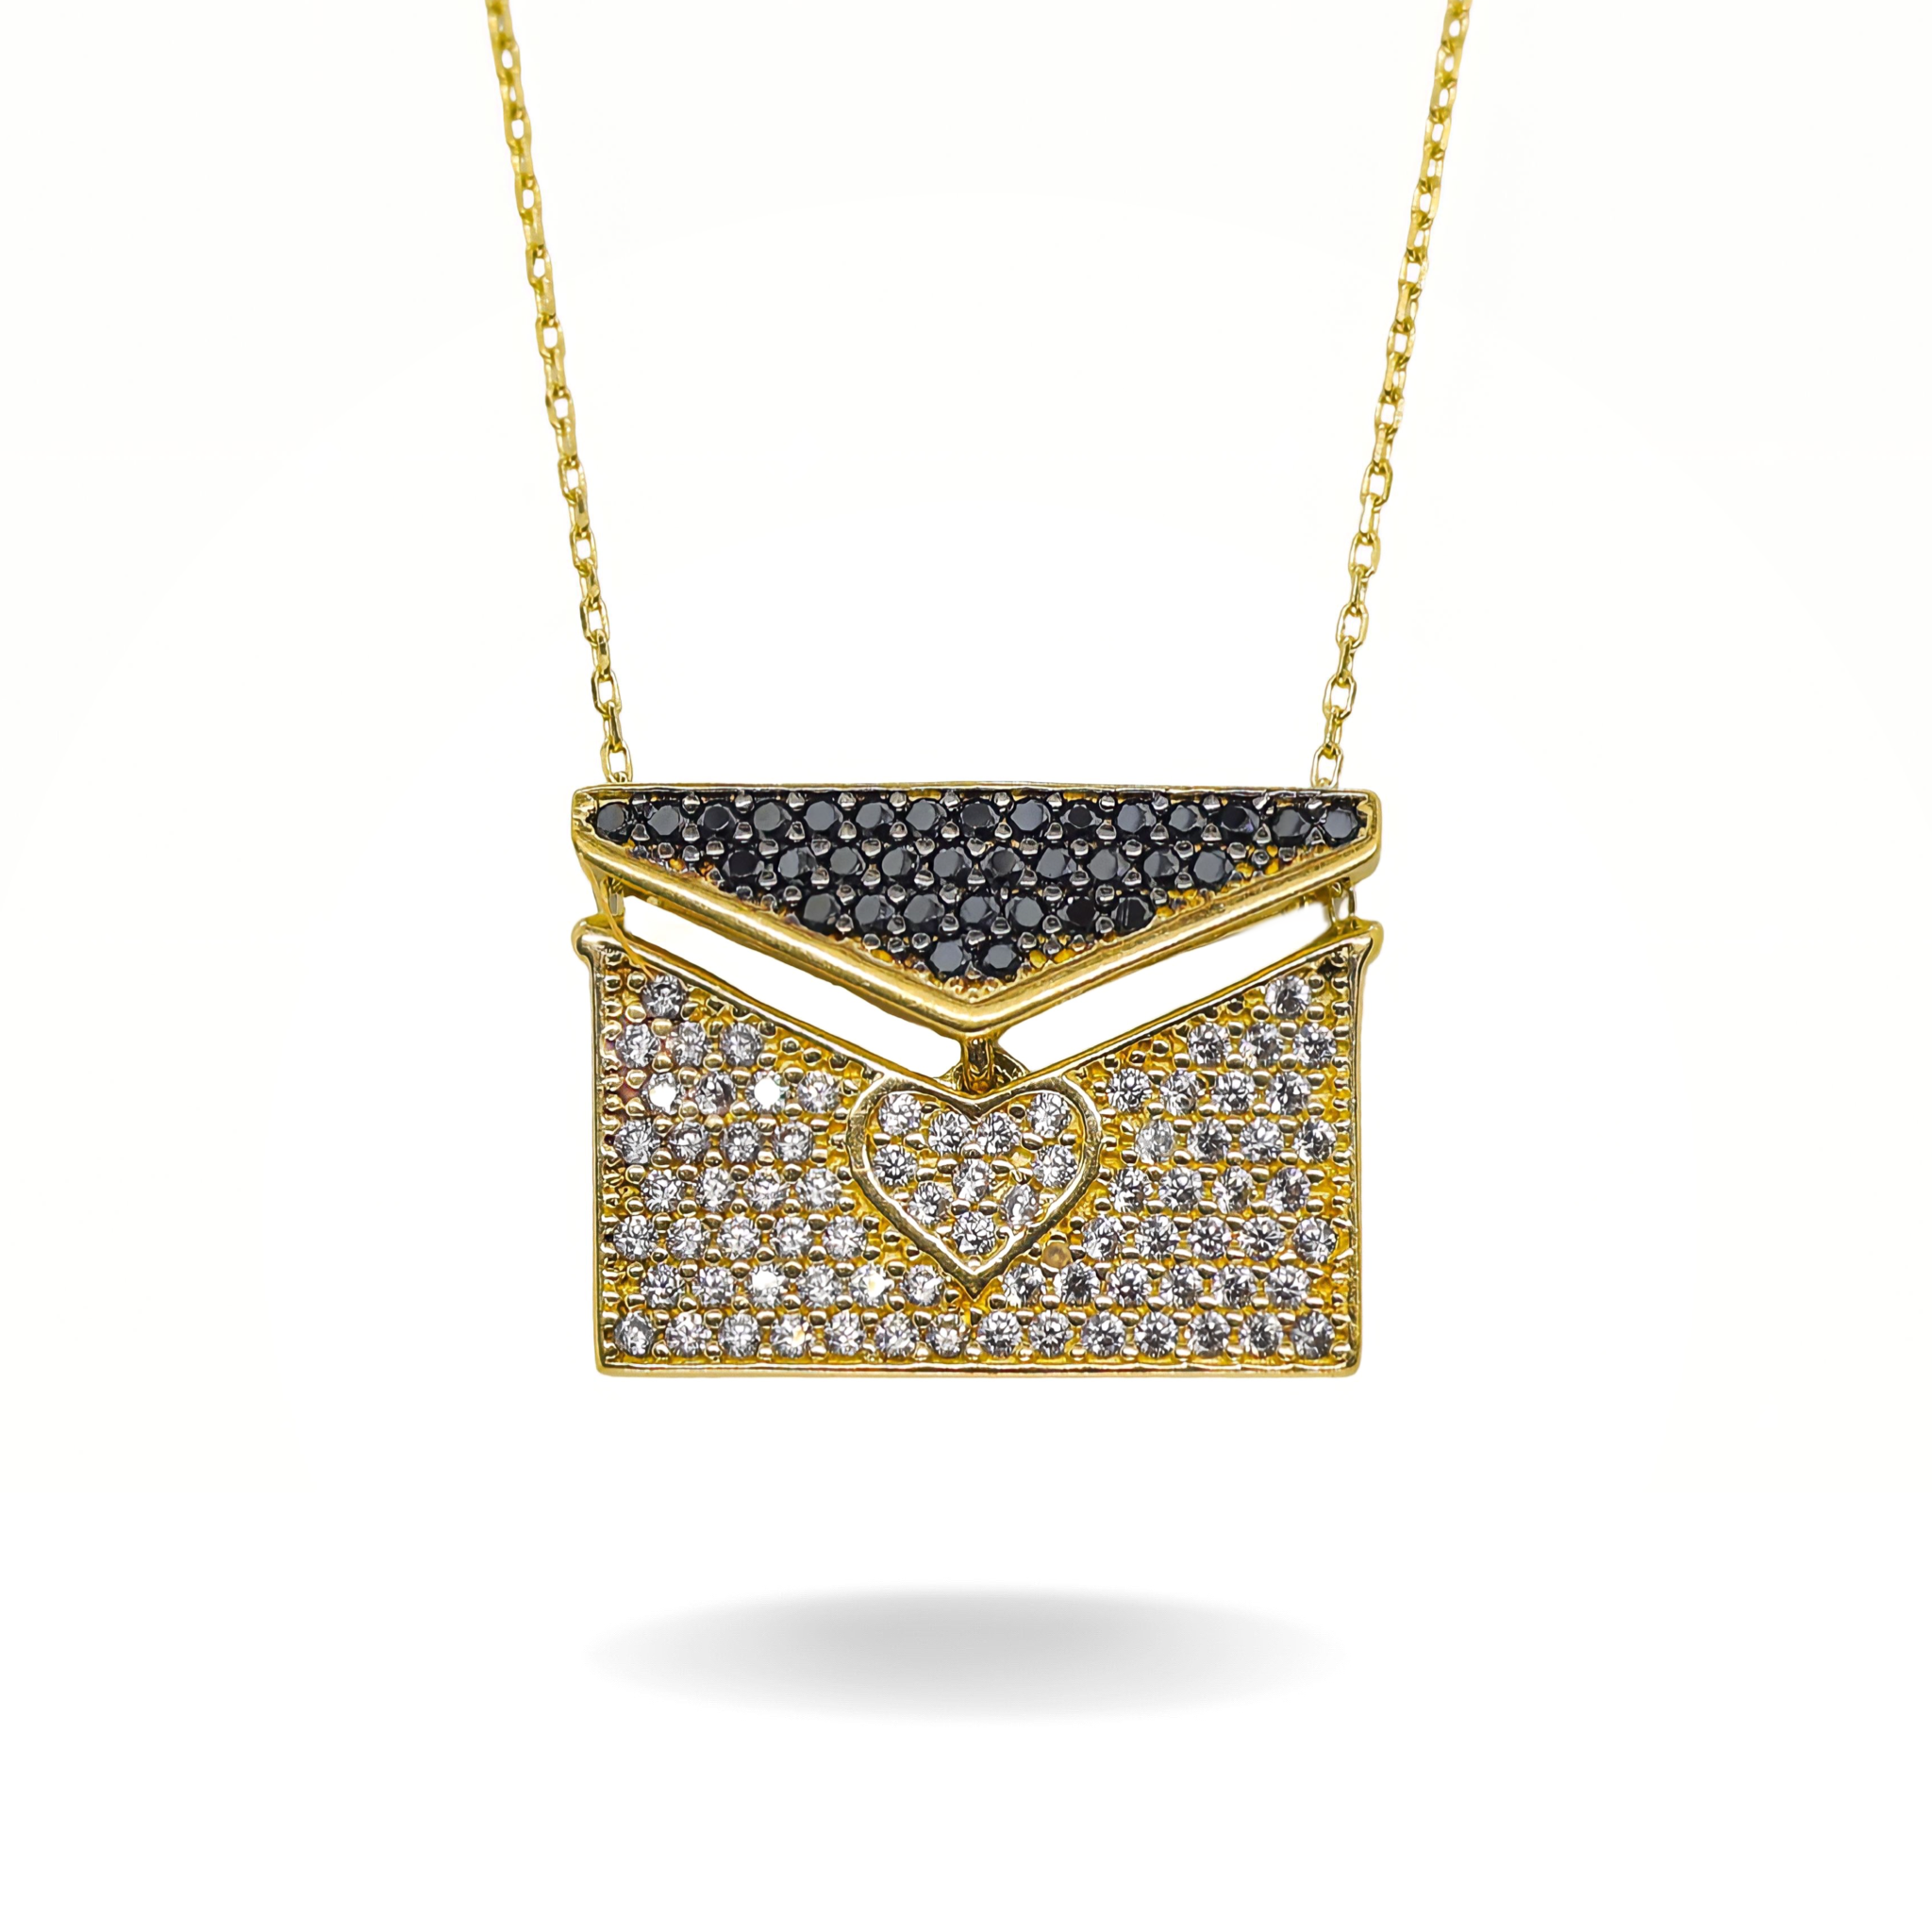 14K YELLOW GOLD PAVE BLACK + WHITE PURSE NECKLACE